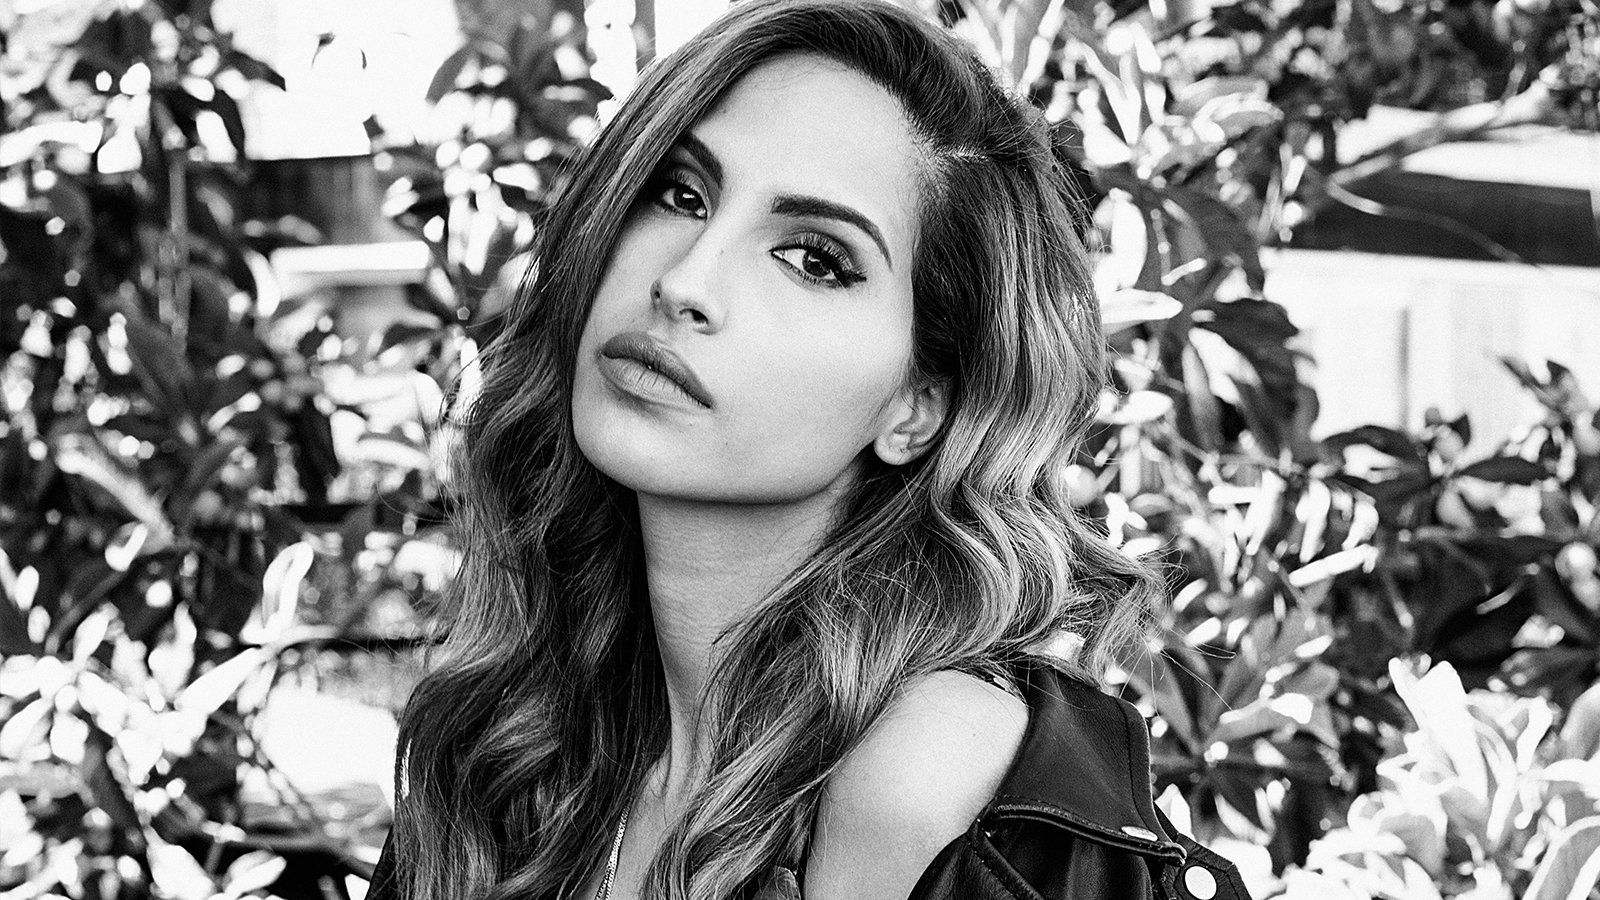 Snoh Aalegra: From Stockholm To L.A